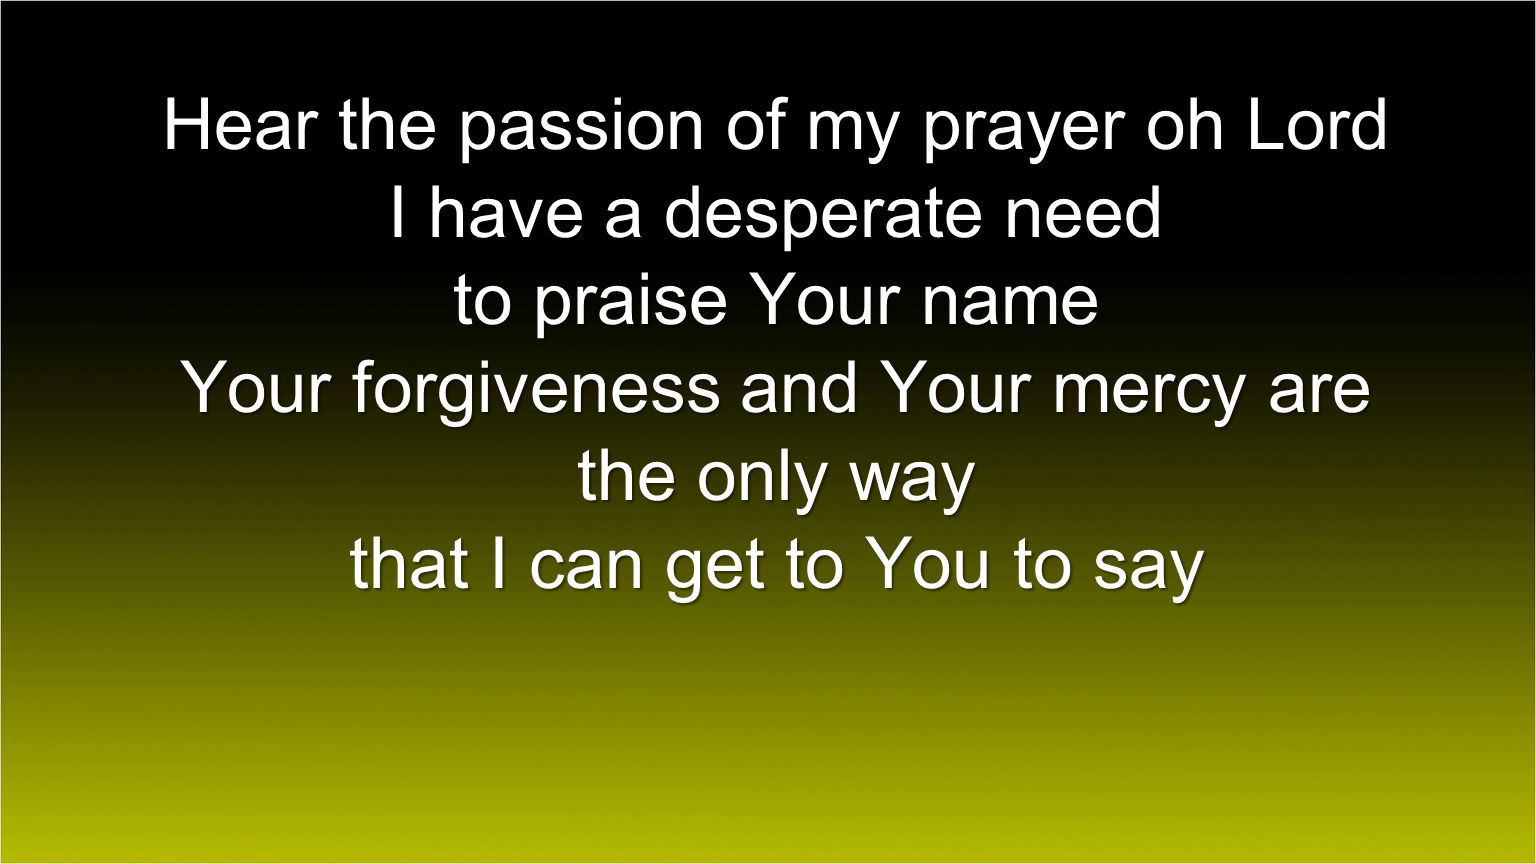 Hear the passion of my prayer oh Lord I have a desperate need